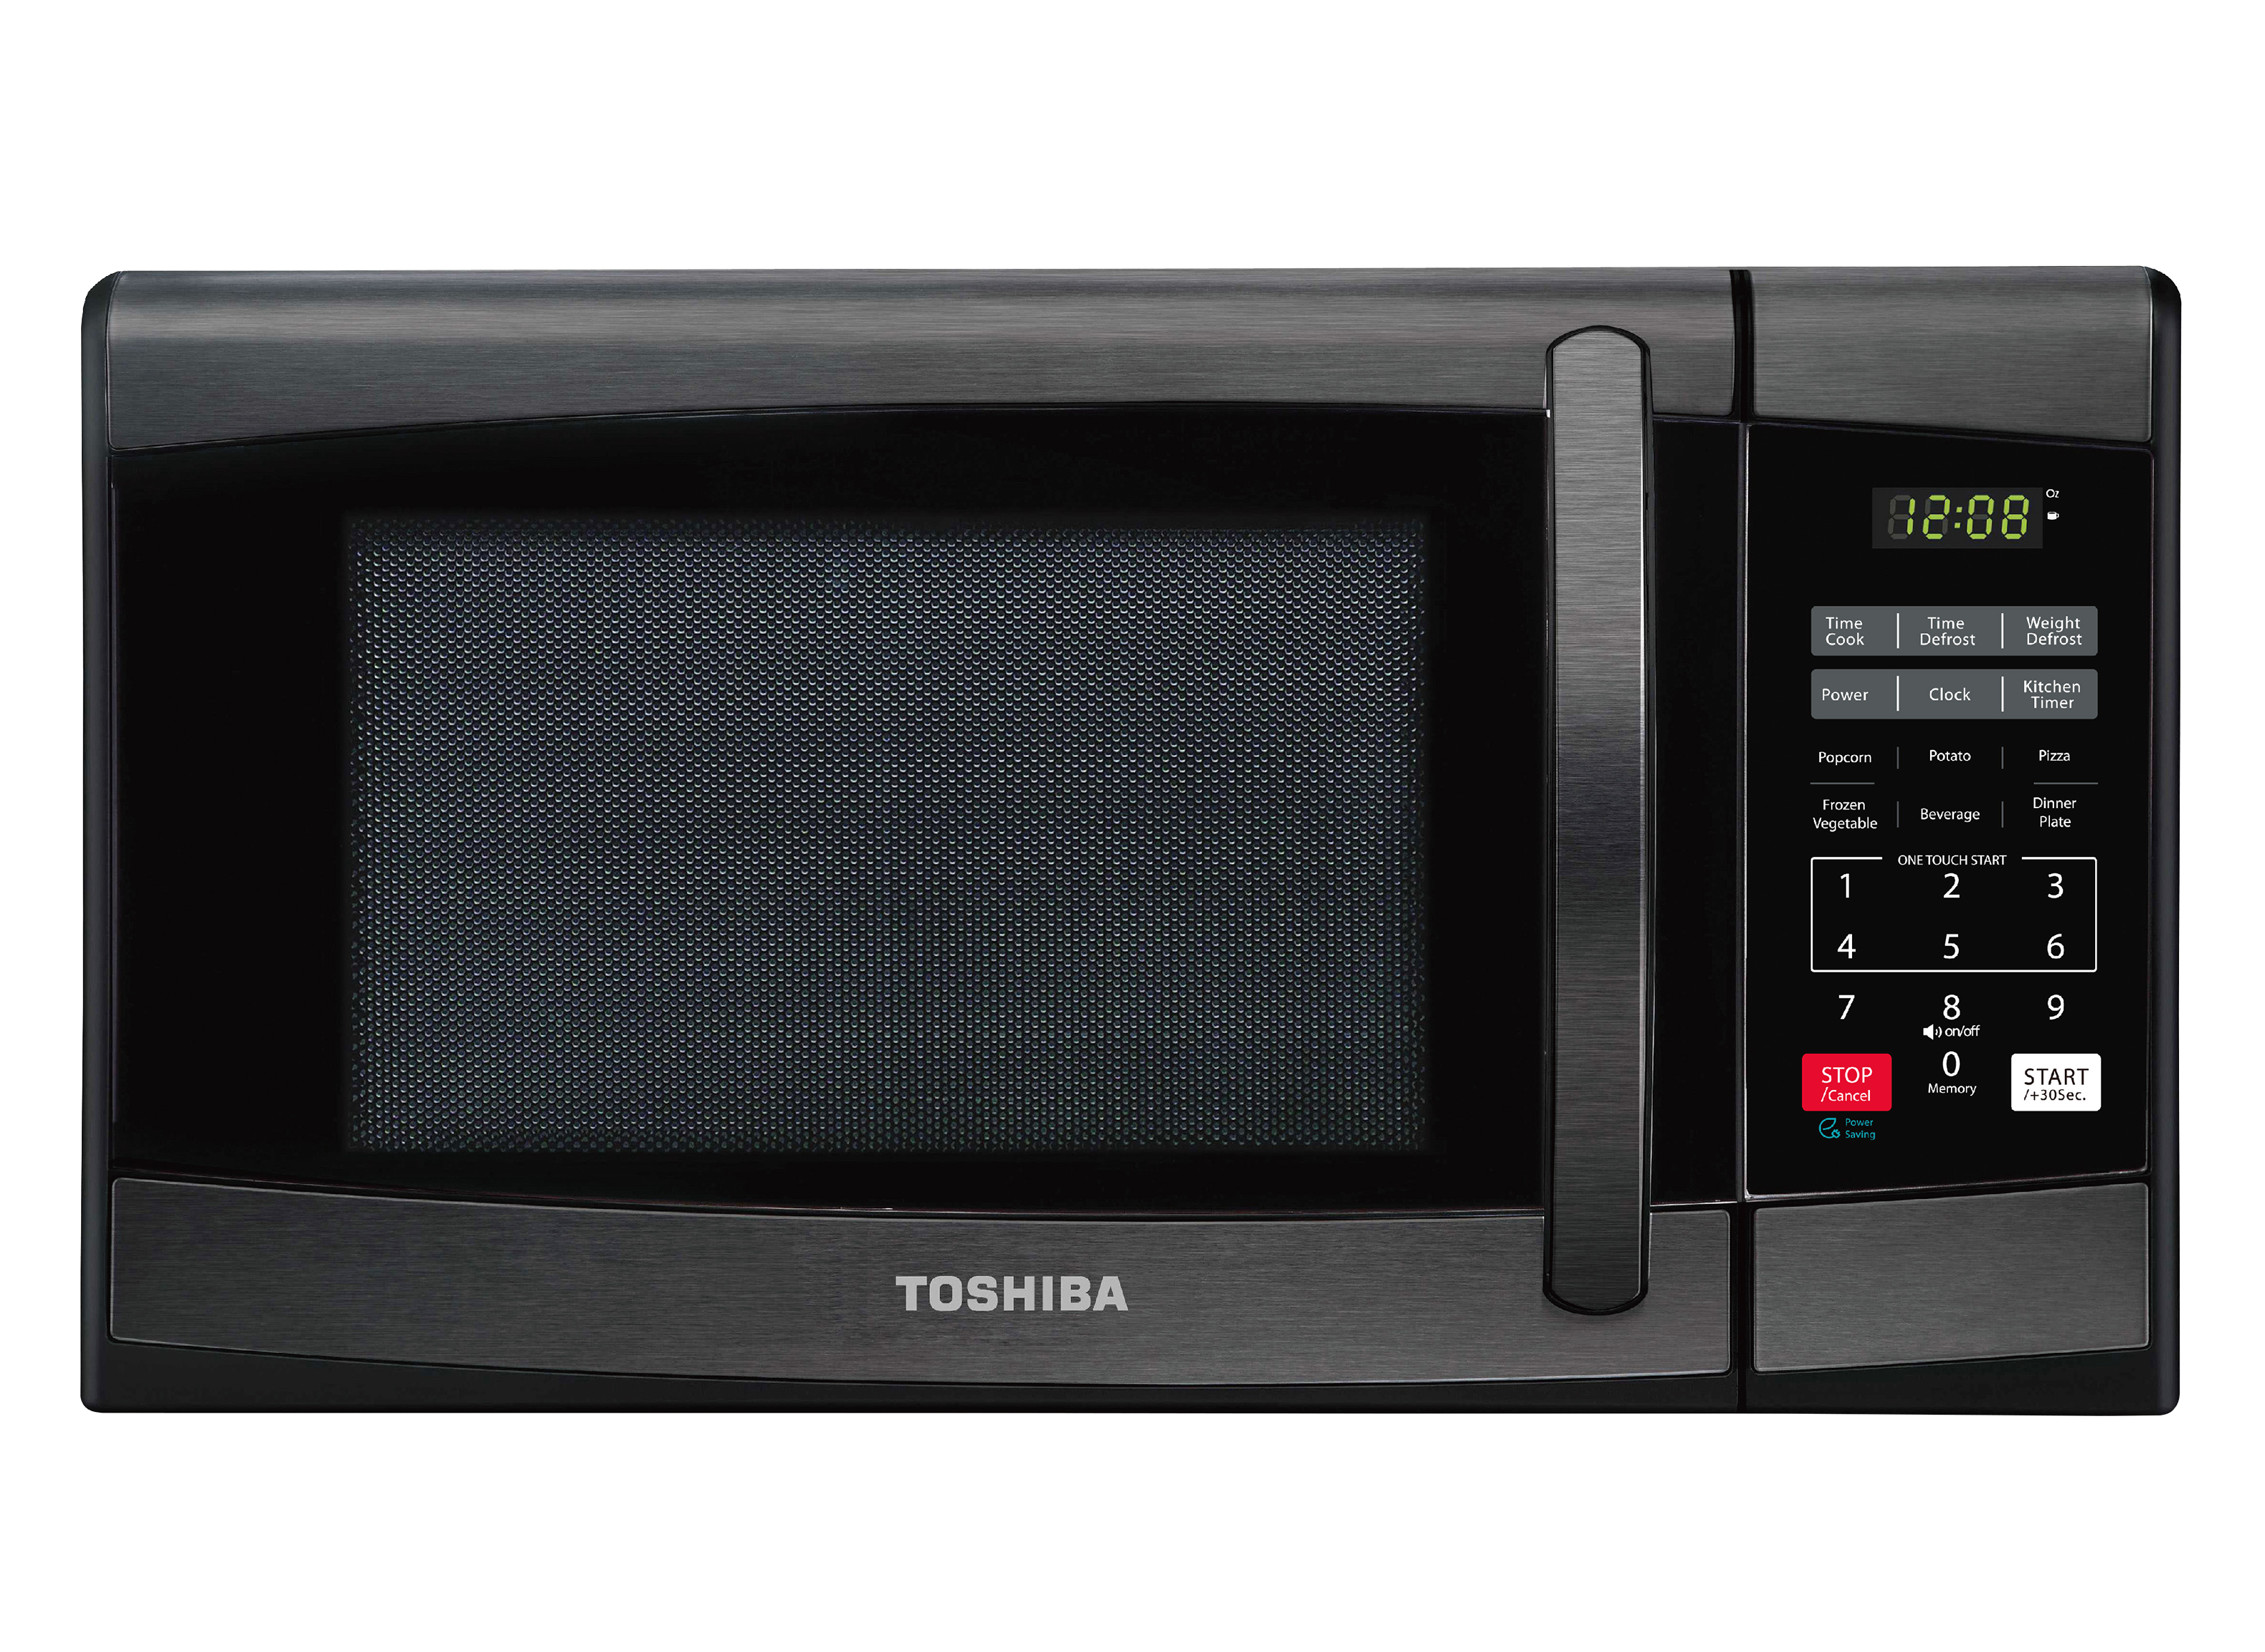 Toshiba 0.9 cu. ft. Stainless Steel Countertop Microwave Oven